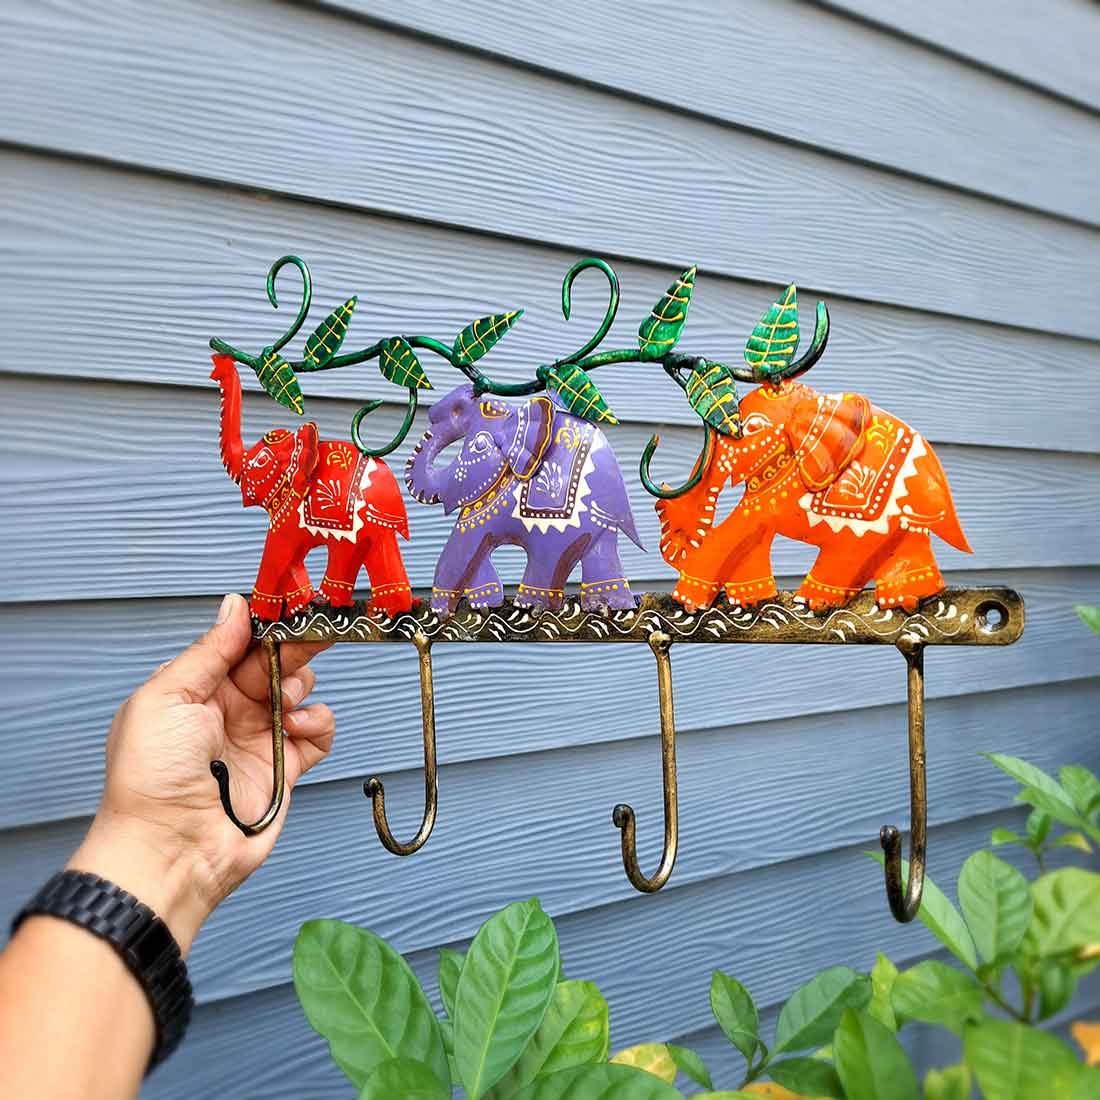 Key Holder Wall Hanger | Key Hanging Organizer Stand - Elephant Design| Key Hook Hanging Wall Mount - For Home, Entrance, Office Decor & Gifts - 11 inch (4 Hooks)